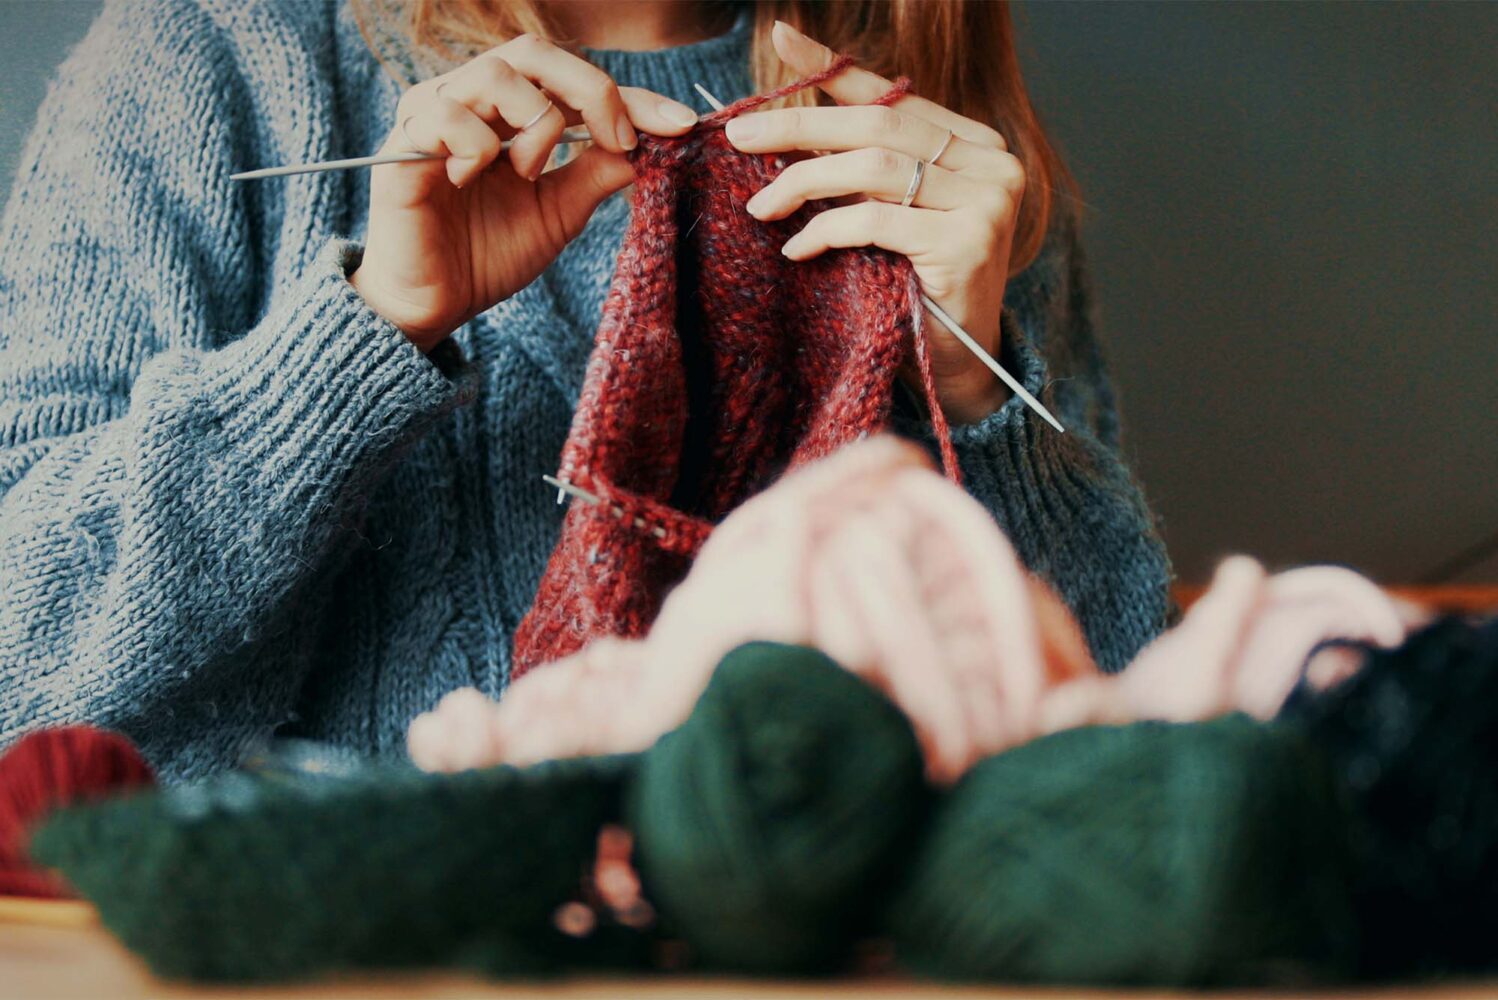 Photo: A young woman knitting with balls of yarn on the table in front of her, in various colors